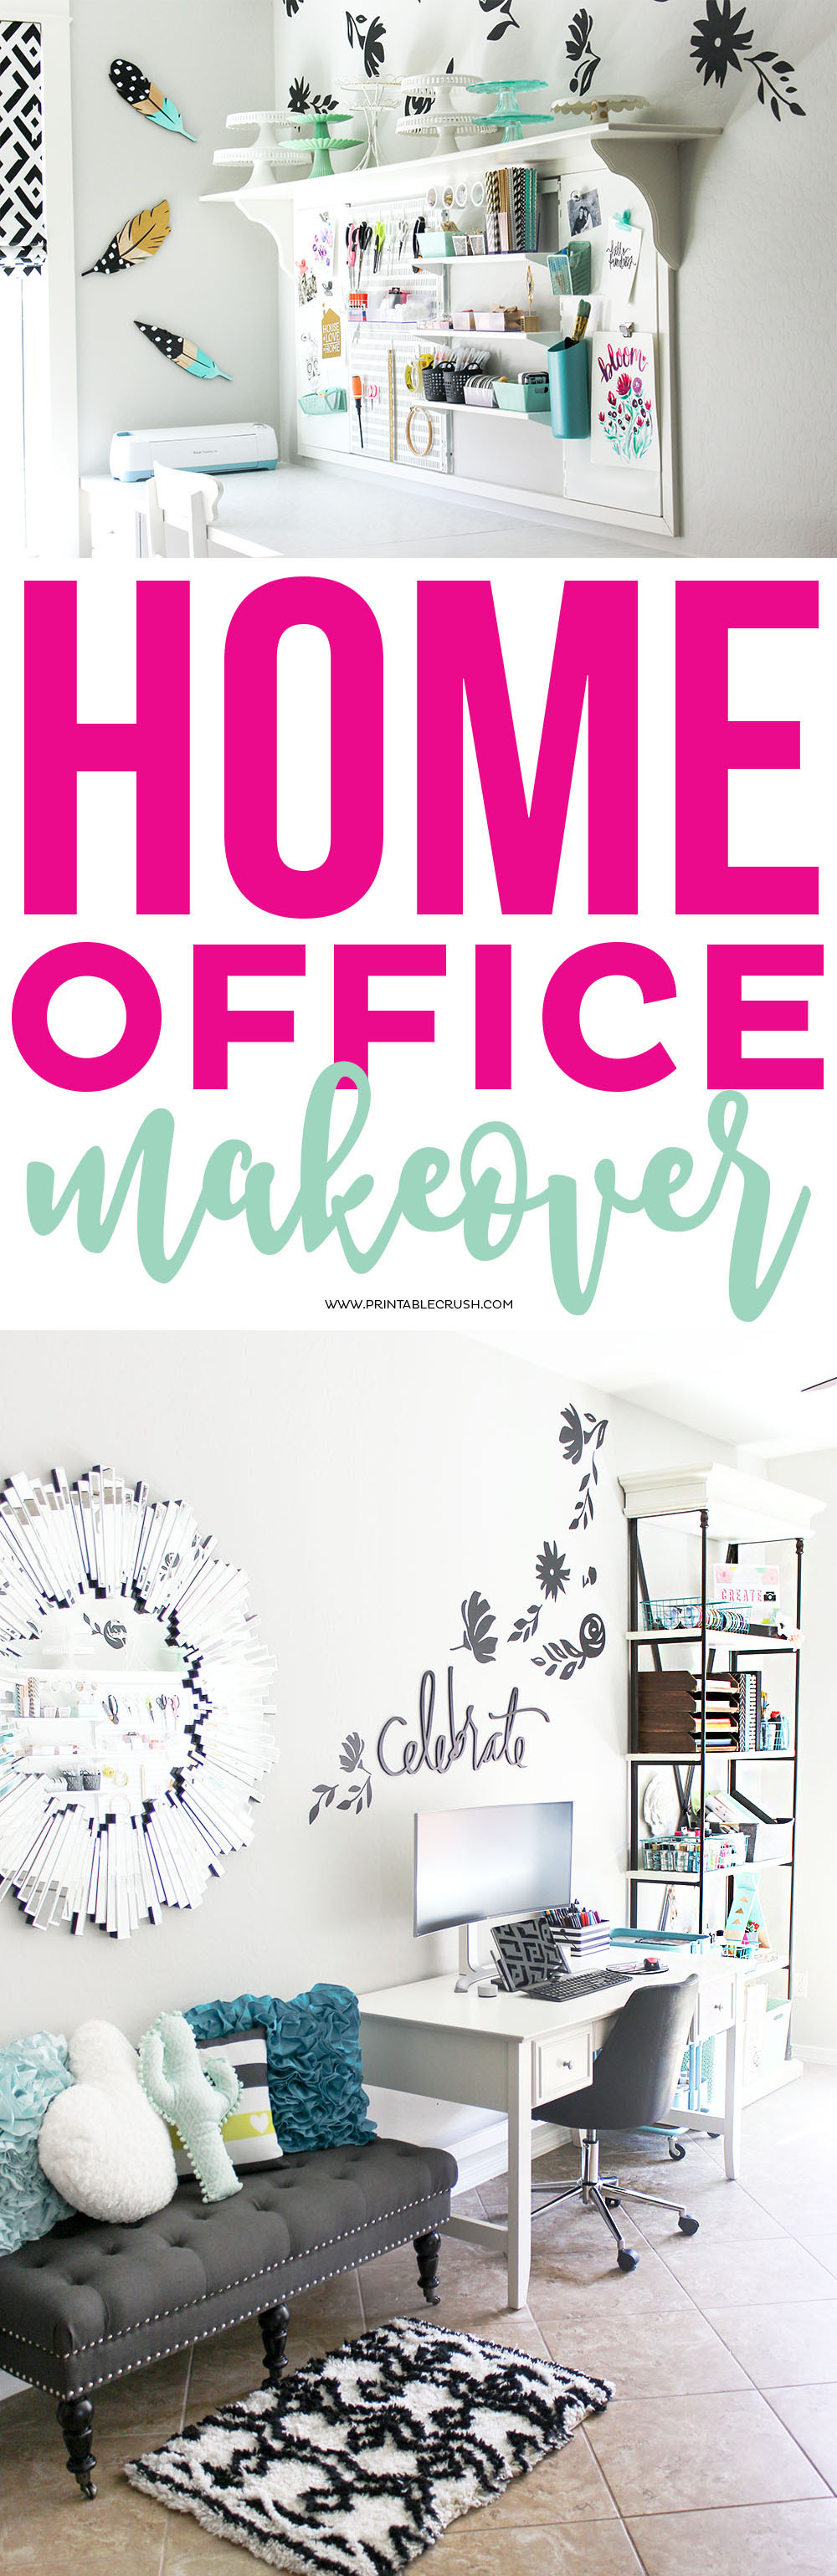 http://printablecrush.com/wp-content/uploads/2017/03/Artistic-Craft-Room-and-Home-Office-Makeover-2-1.jpg